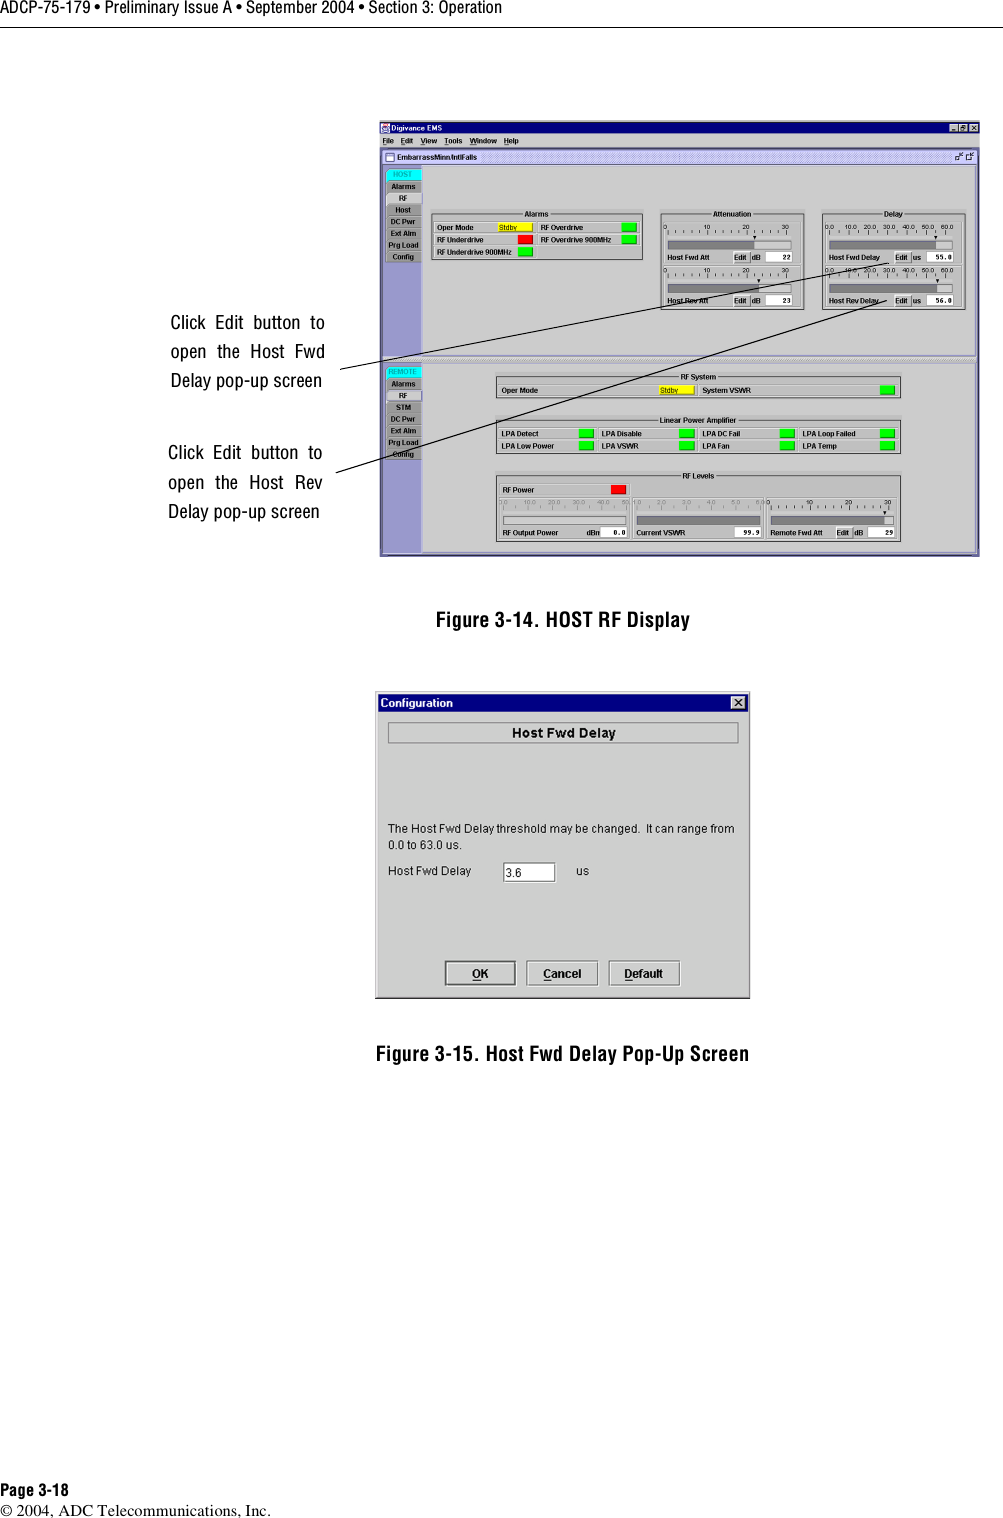 ADCP-75-179 • Preliminary Issue A • September 2004 • Section 3: OperationPage 3-18© 2004, ADC Telecommunications, Inc.Figure 3-14. HOST RF DisplayFigure 3-15. Host Fwd Delay Pop-Up ScreenClick Edit button toopen the Host FwdDelay pop-up screenClick Edit button toopen the Host RevDelay pop-up screen